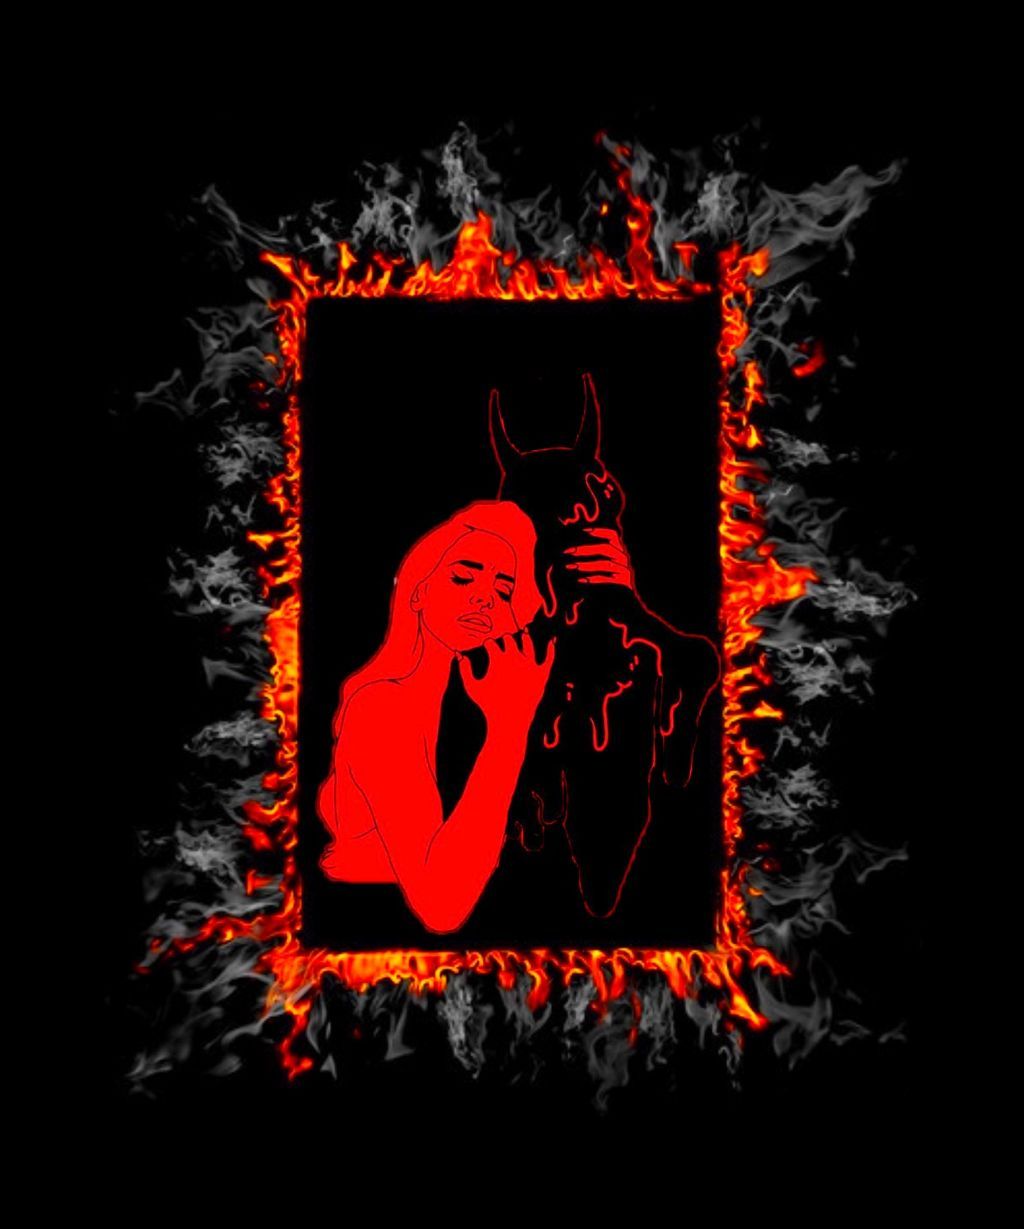 A red and black image of a woman and a dog with a fire frame - Dark red